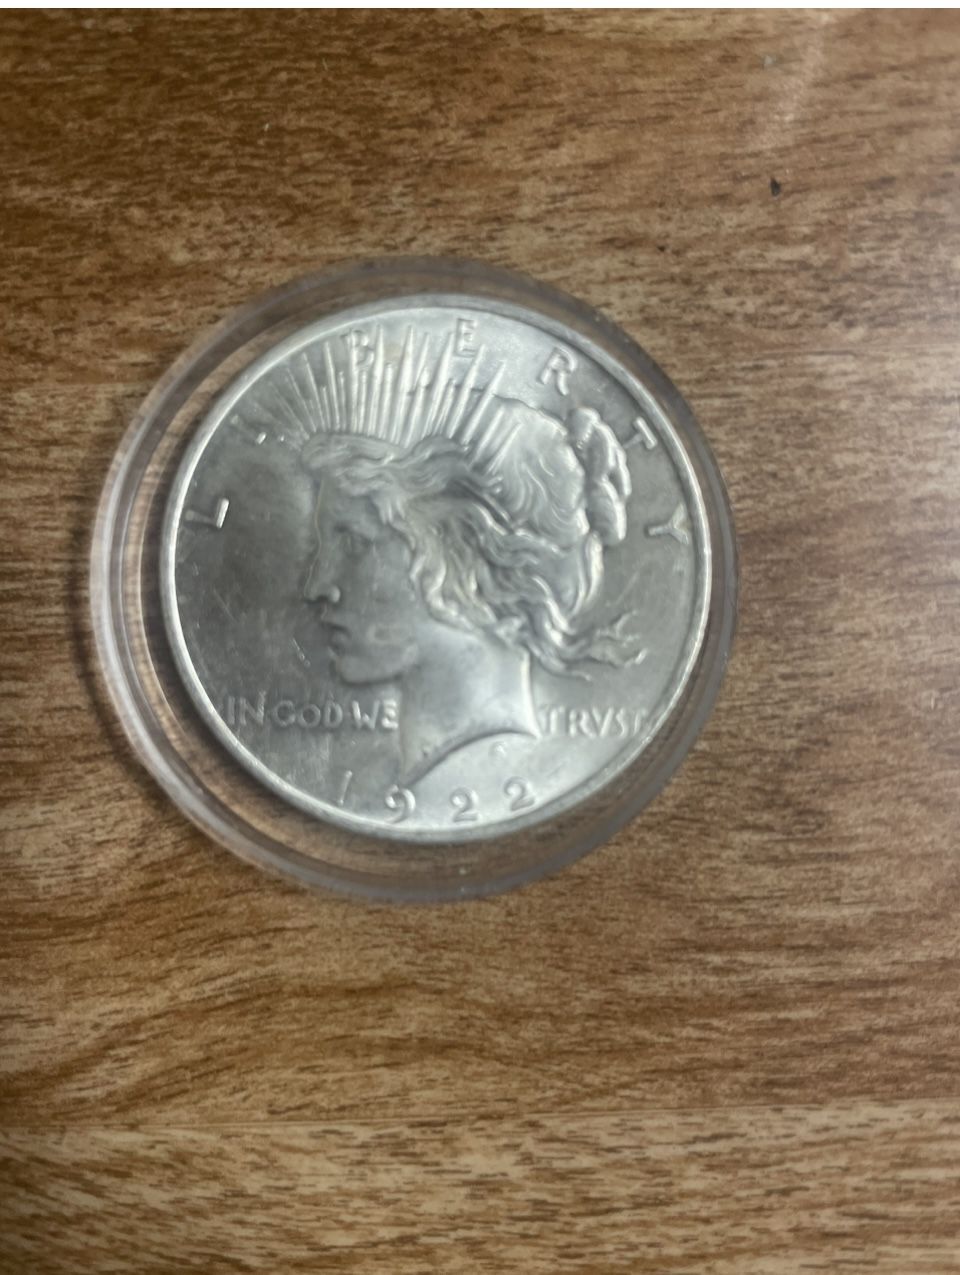 Sliver One Dollar Coin 